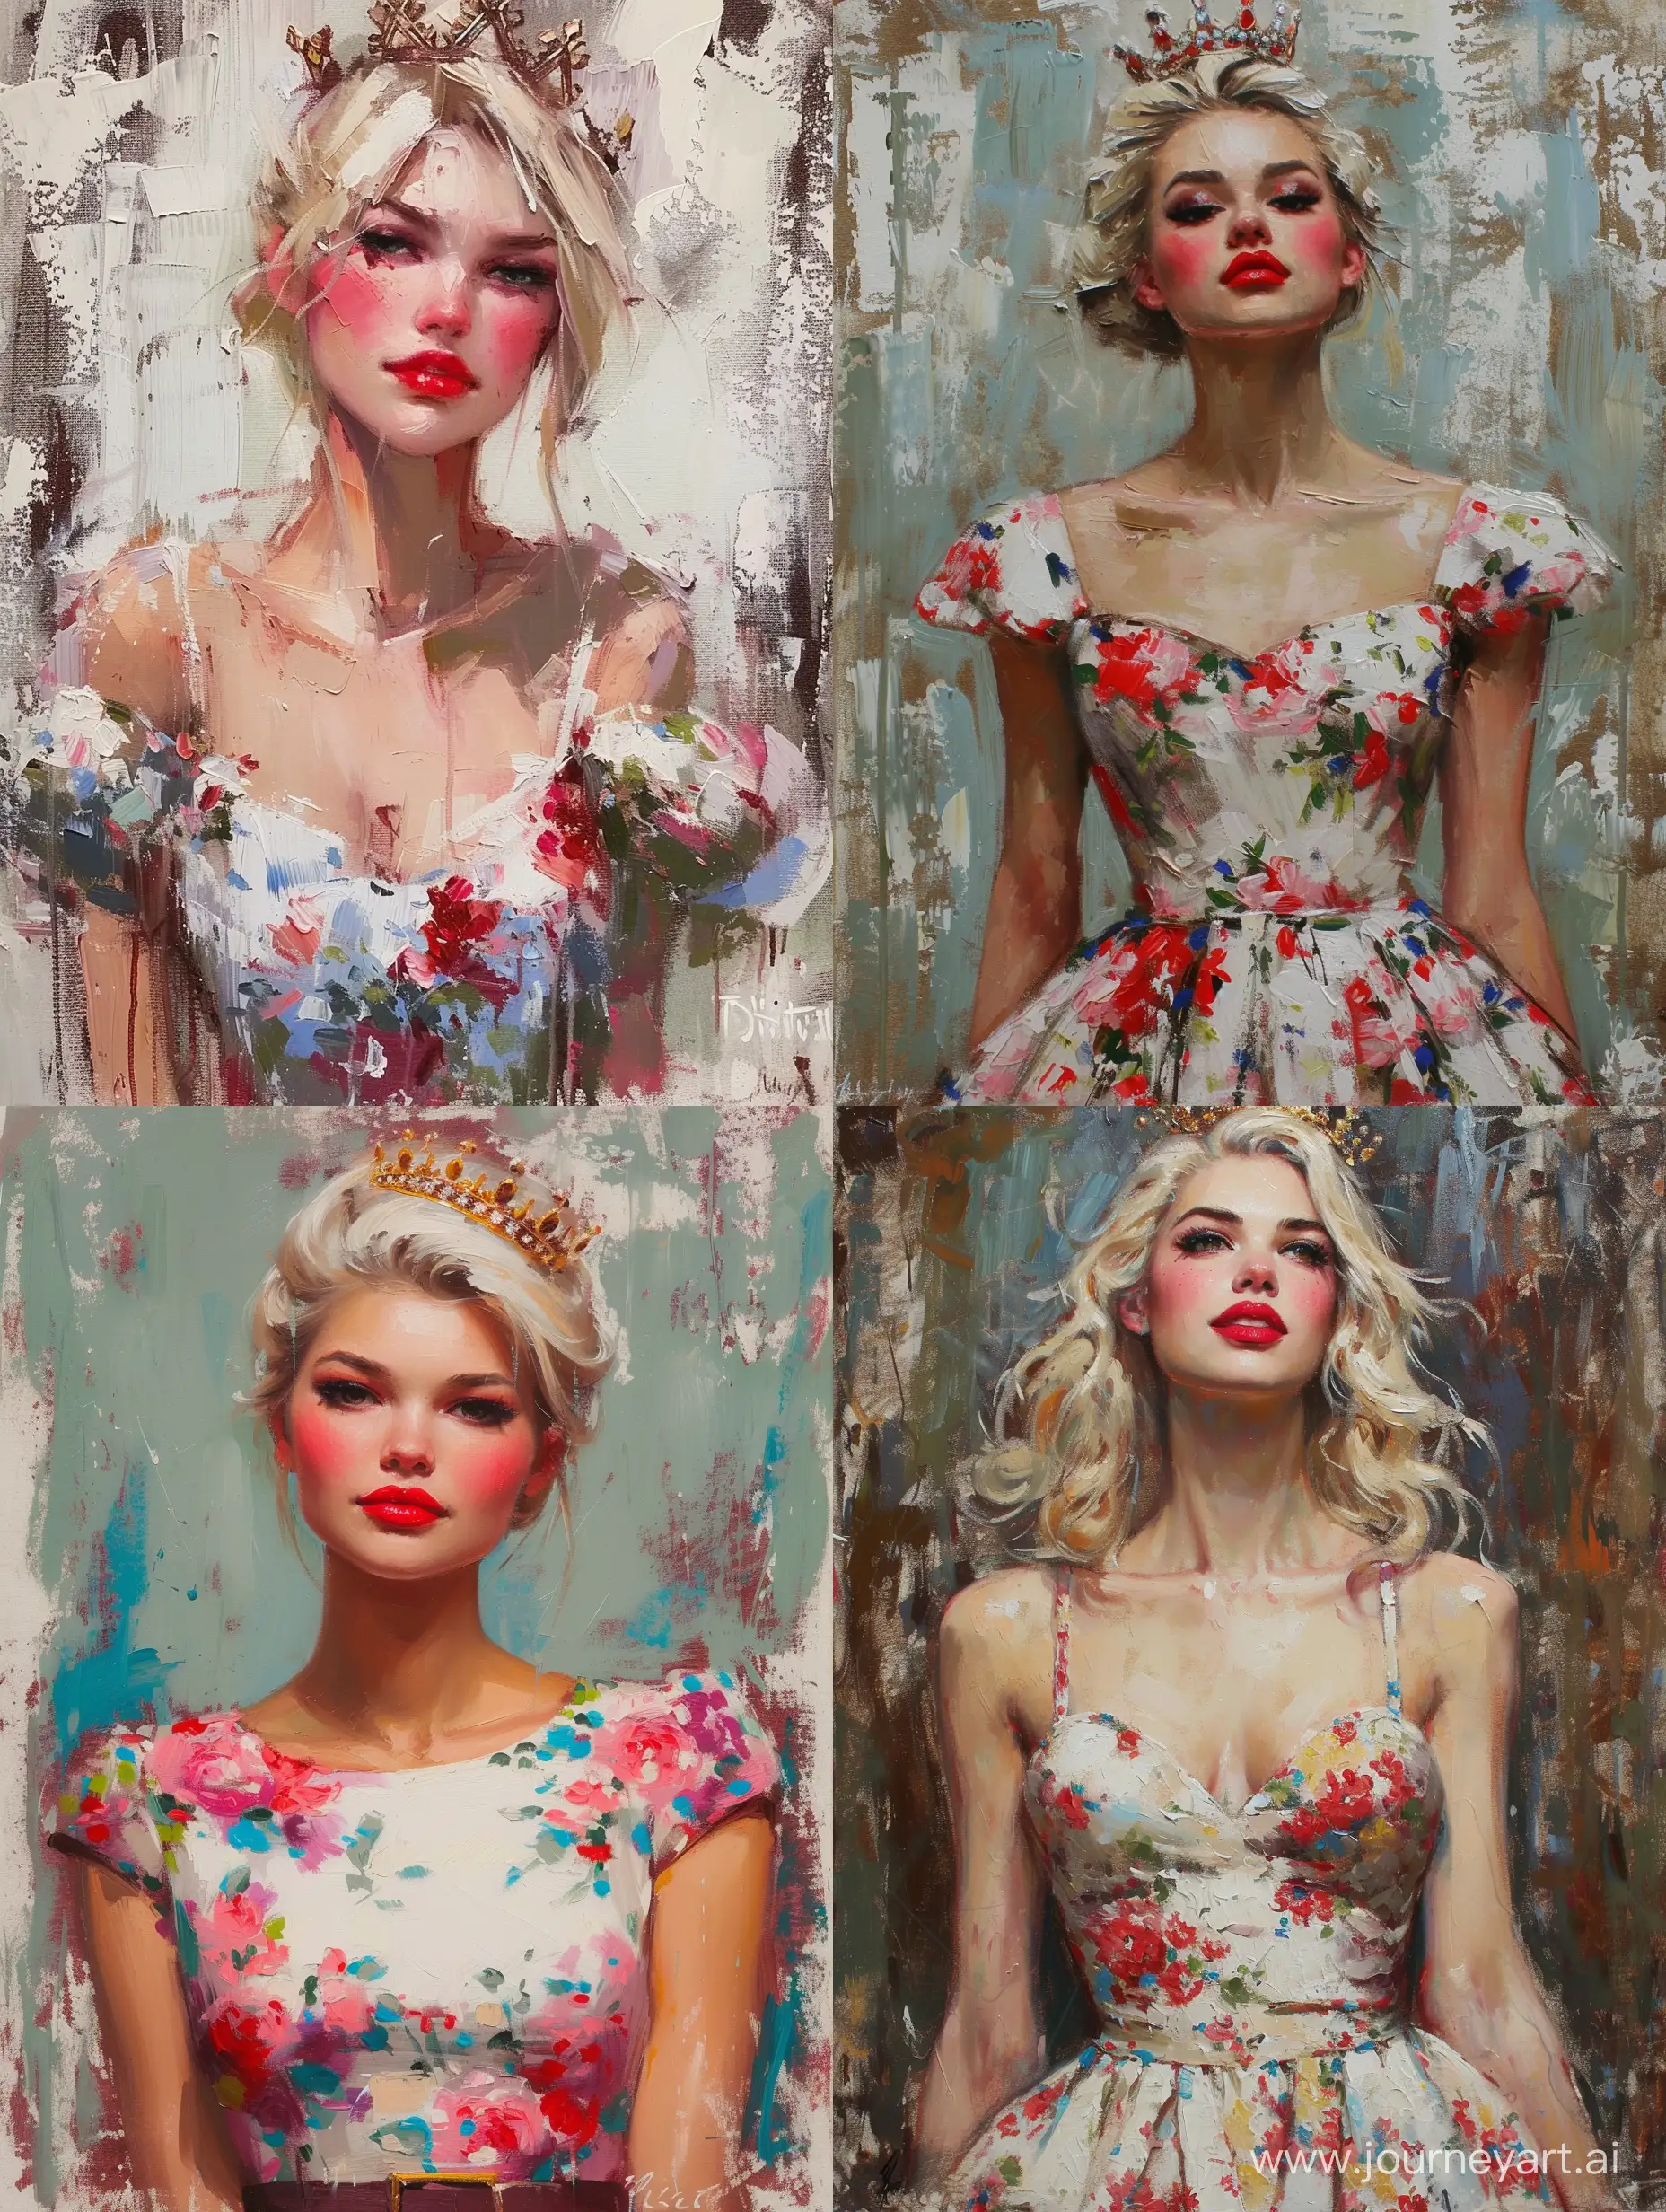 beautiful impressionism painting of a beautiful British woman,blonde hair, white tan skin, rosy cheeks and red lips,crown on head wearing beautiful floral ball dress ,brush strokes are easily visible.